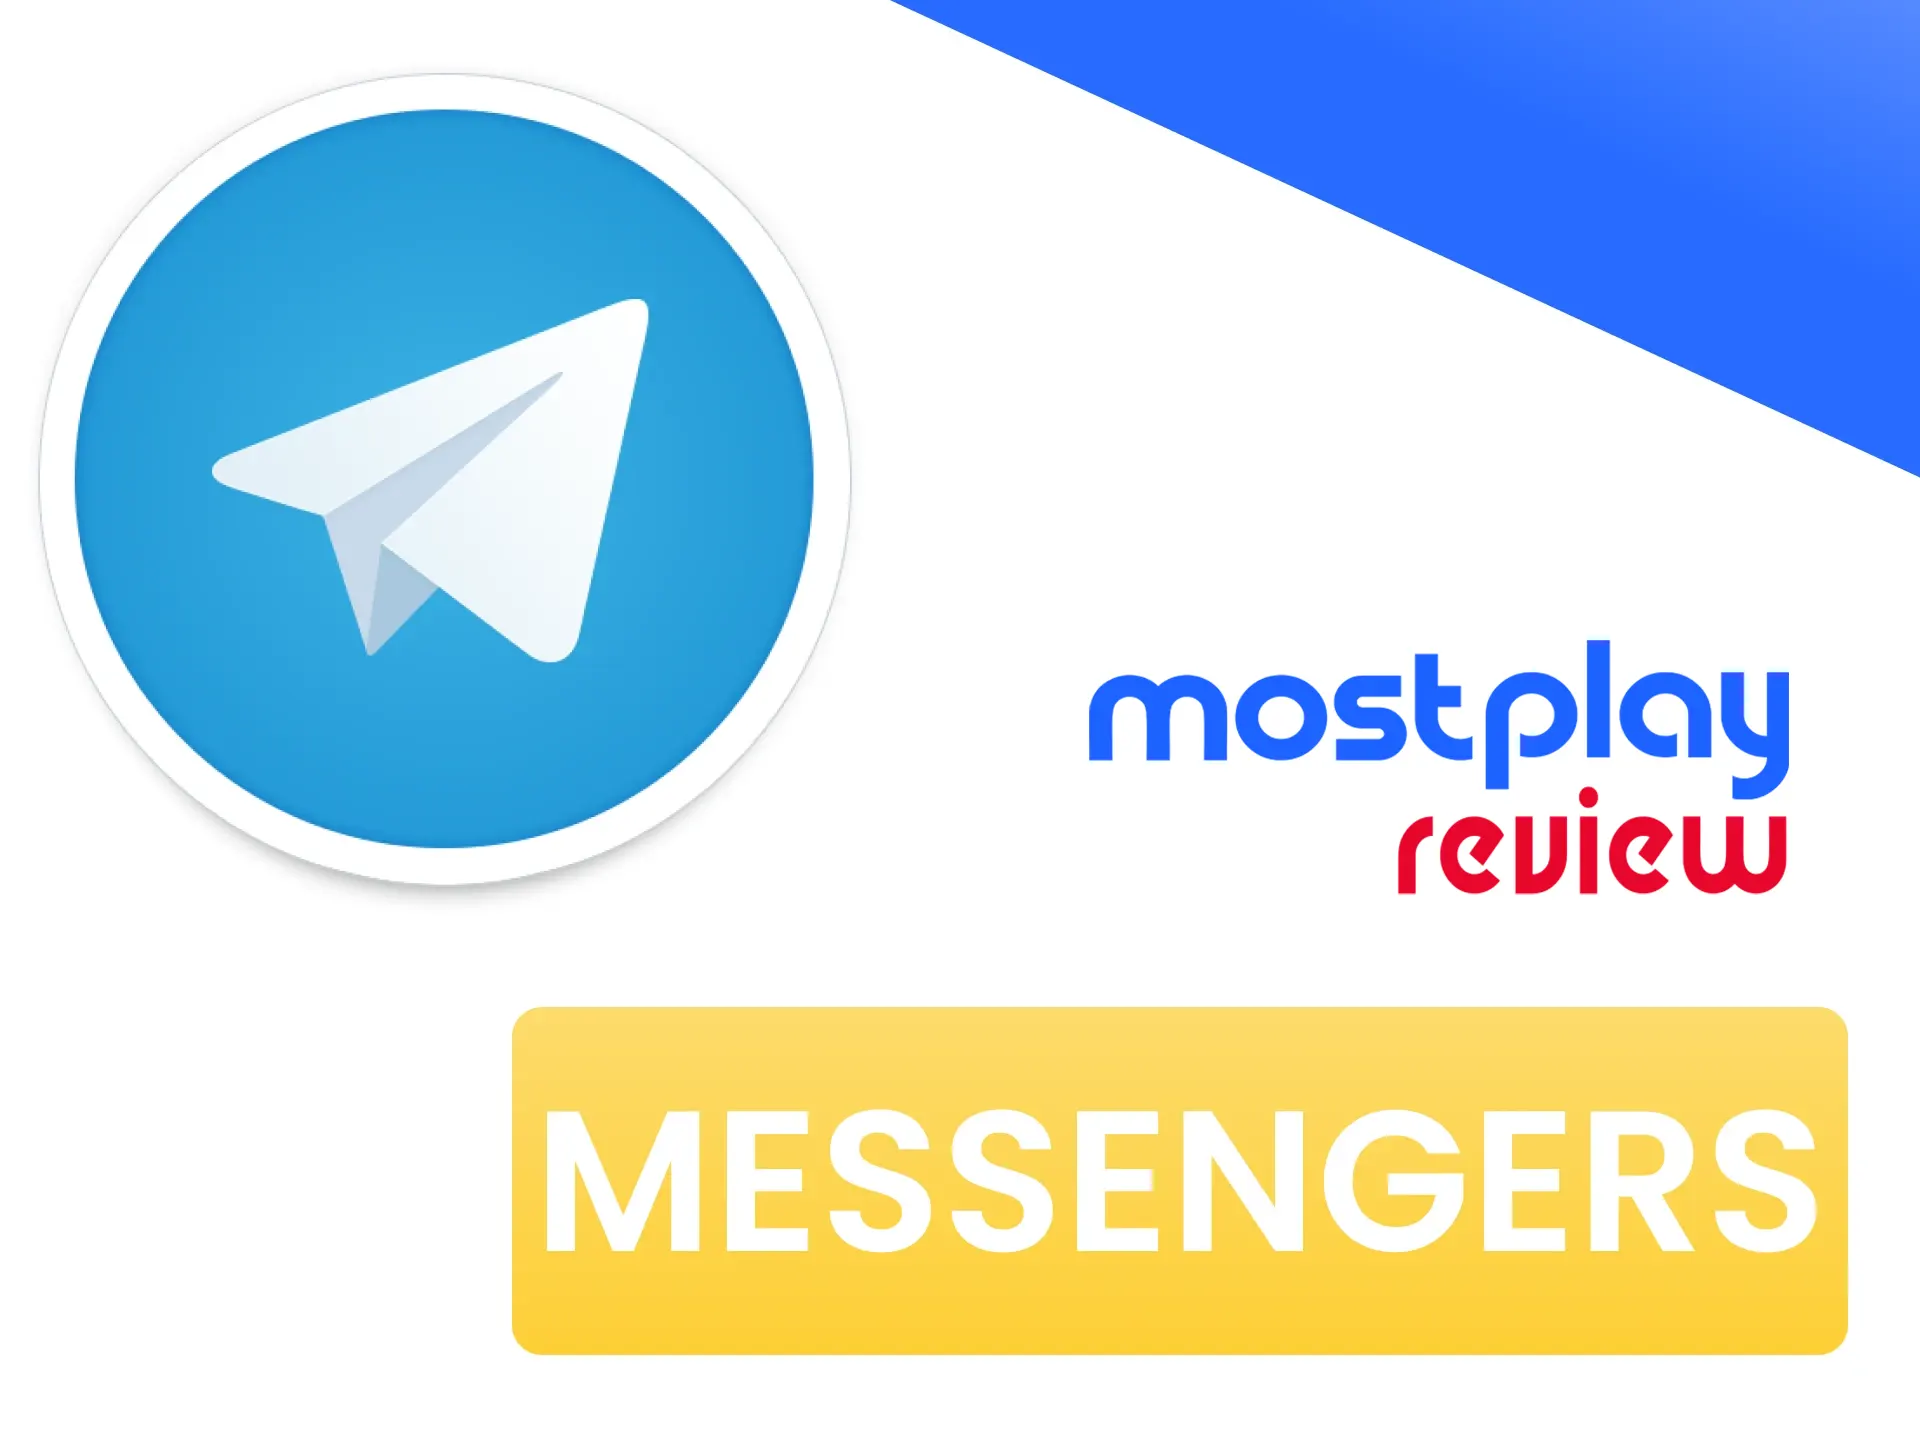 Write your message to Mostplay customer service members via one of the messengers.